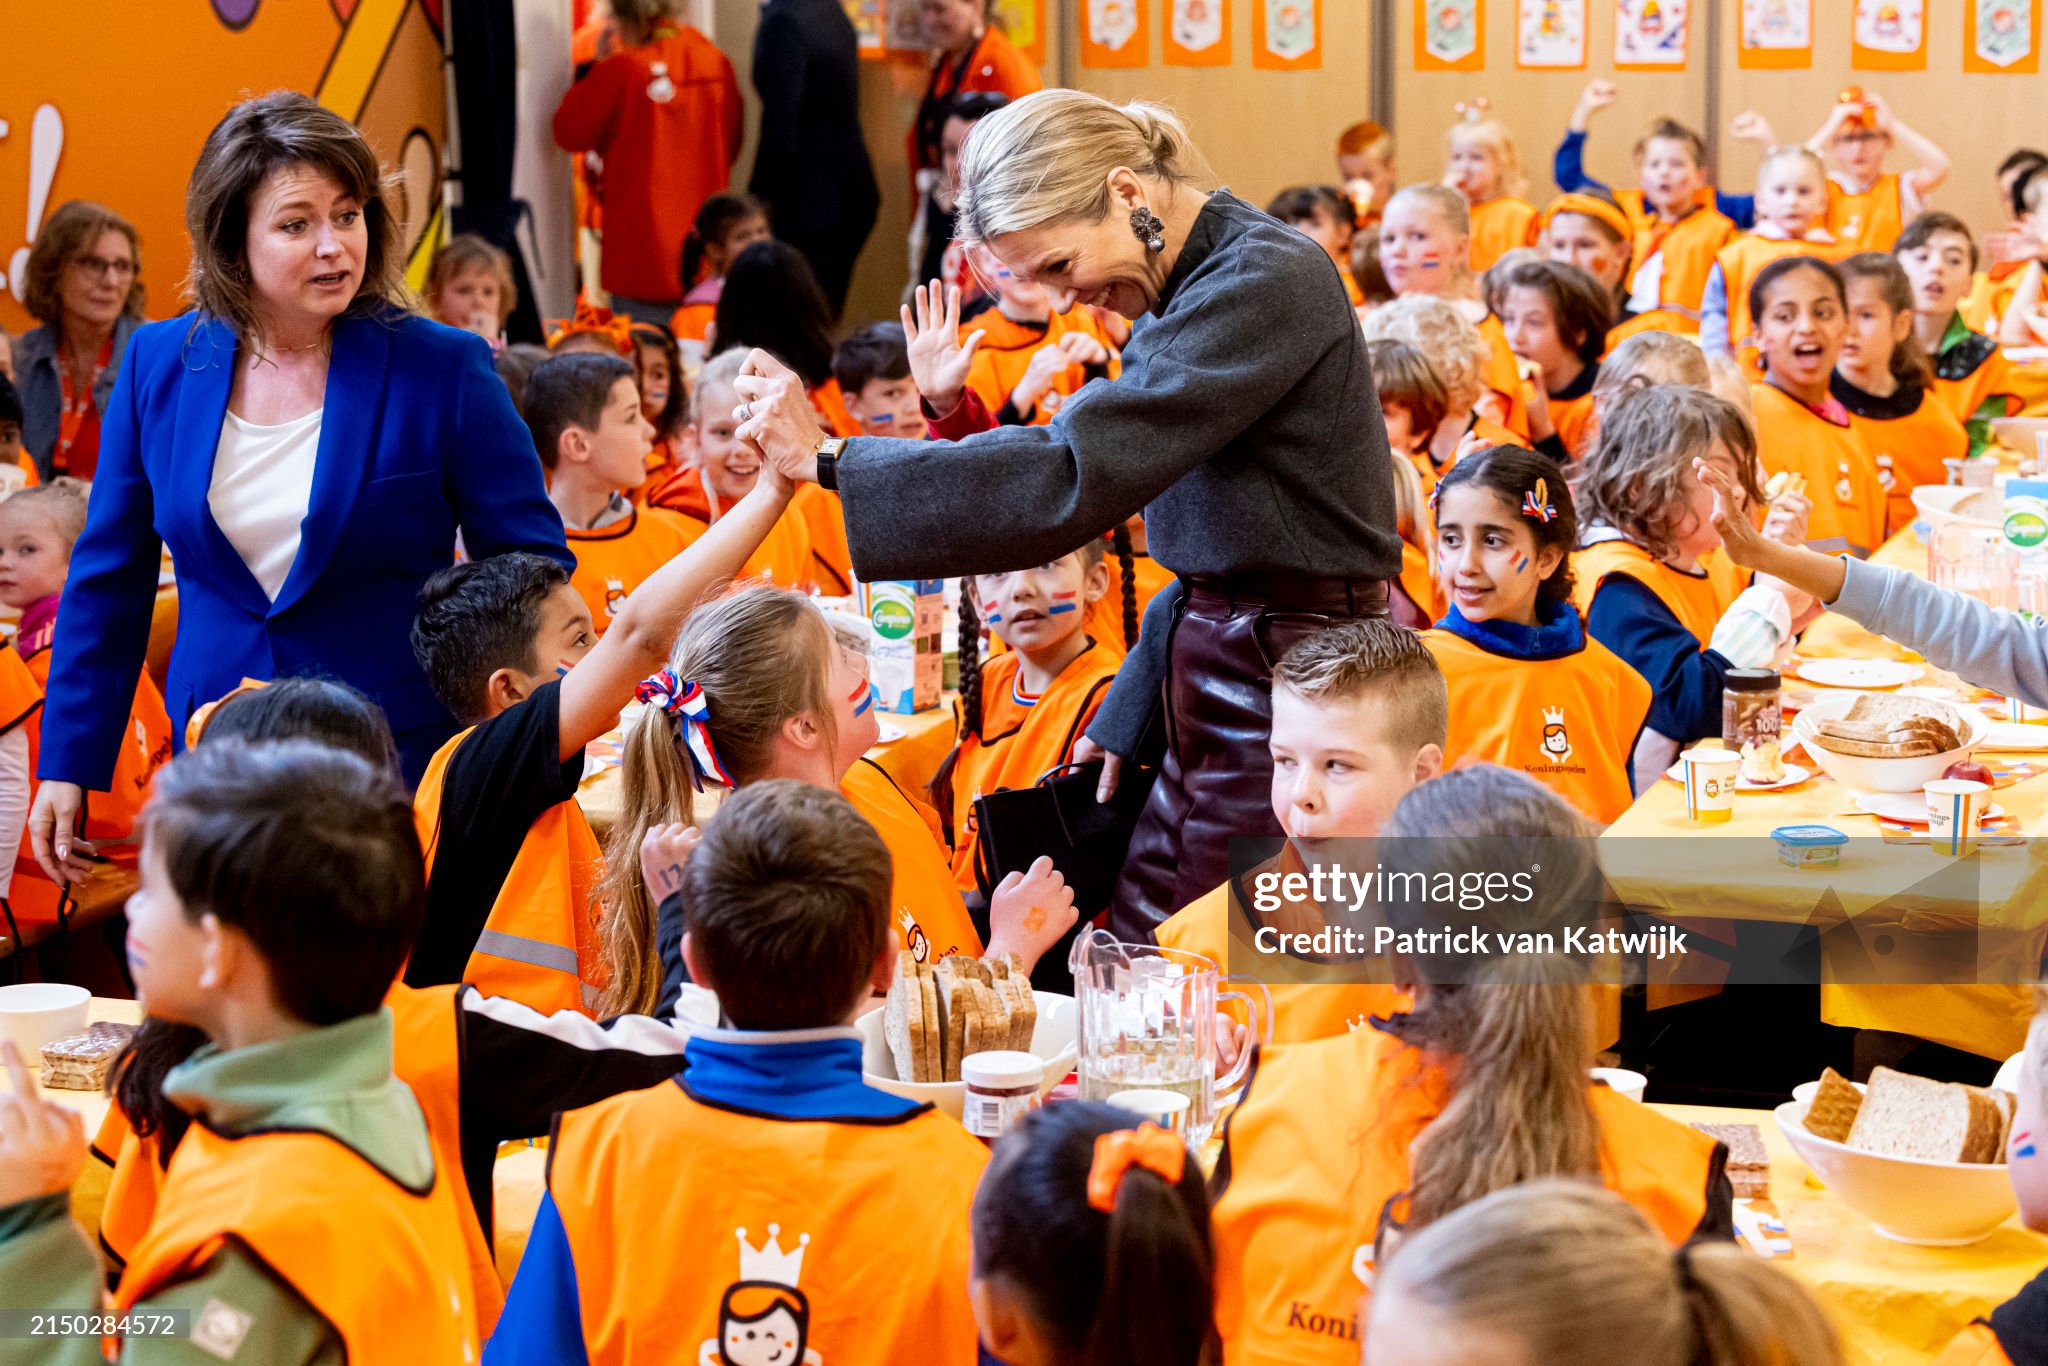 king-willem-alexander-queen-maxima-of-the-netherlands-visits-attend-the-kinsgame-in-hoofddorp.jpg?s=2048x2048&w=gi&k=20&c=nL9PpSh8Pgmg_HOkbBKJsP1nhJLJUgskbhsXS6wbS3w=